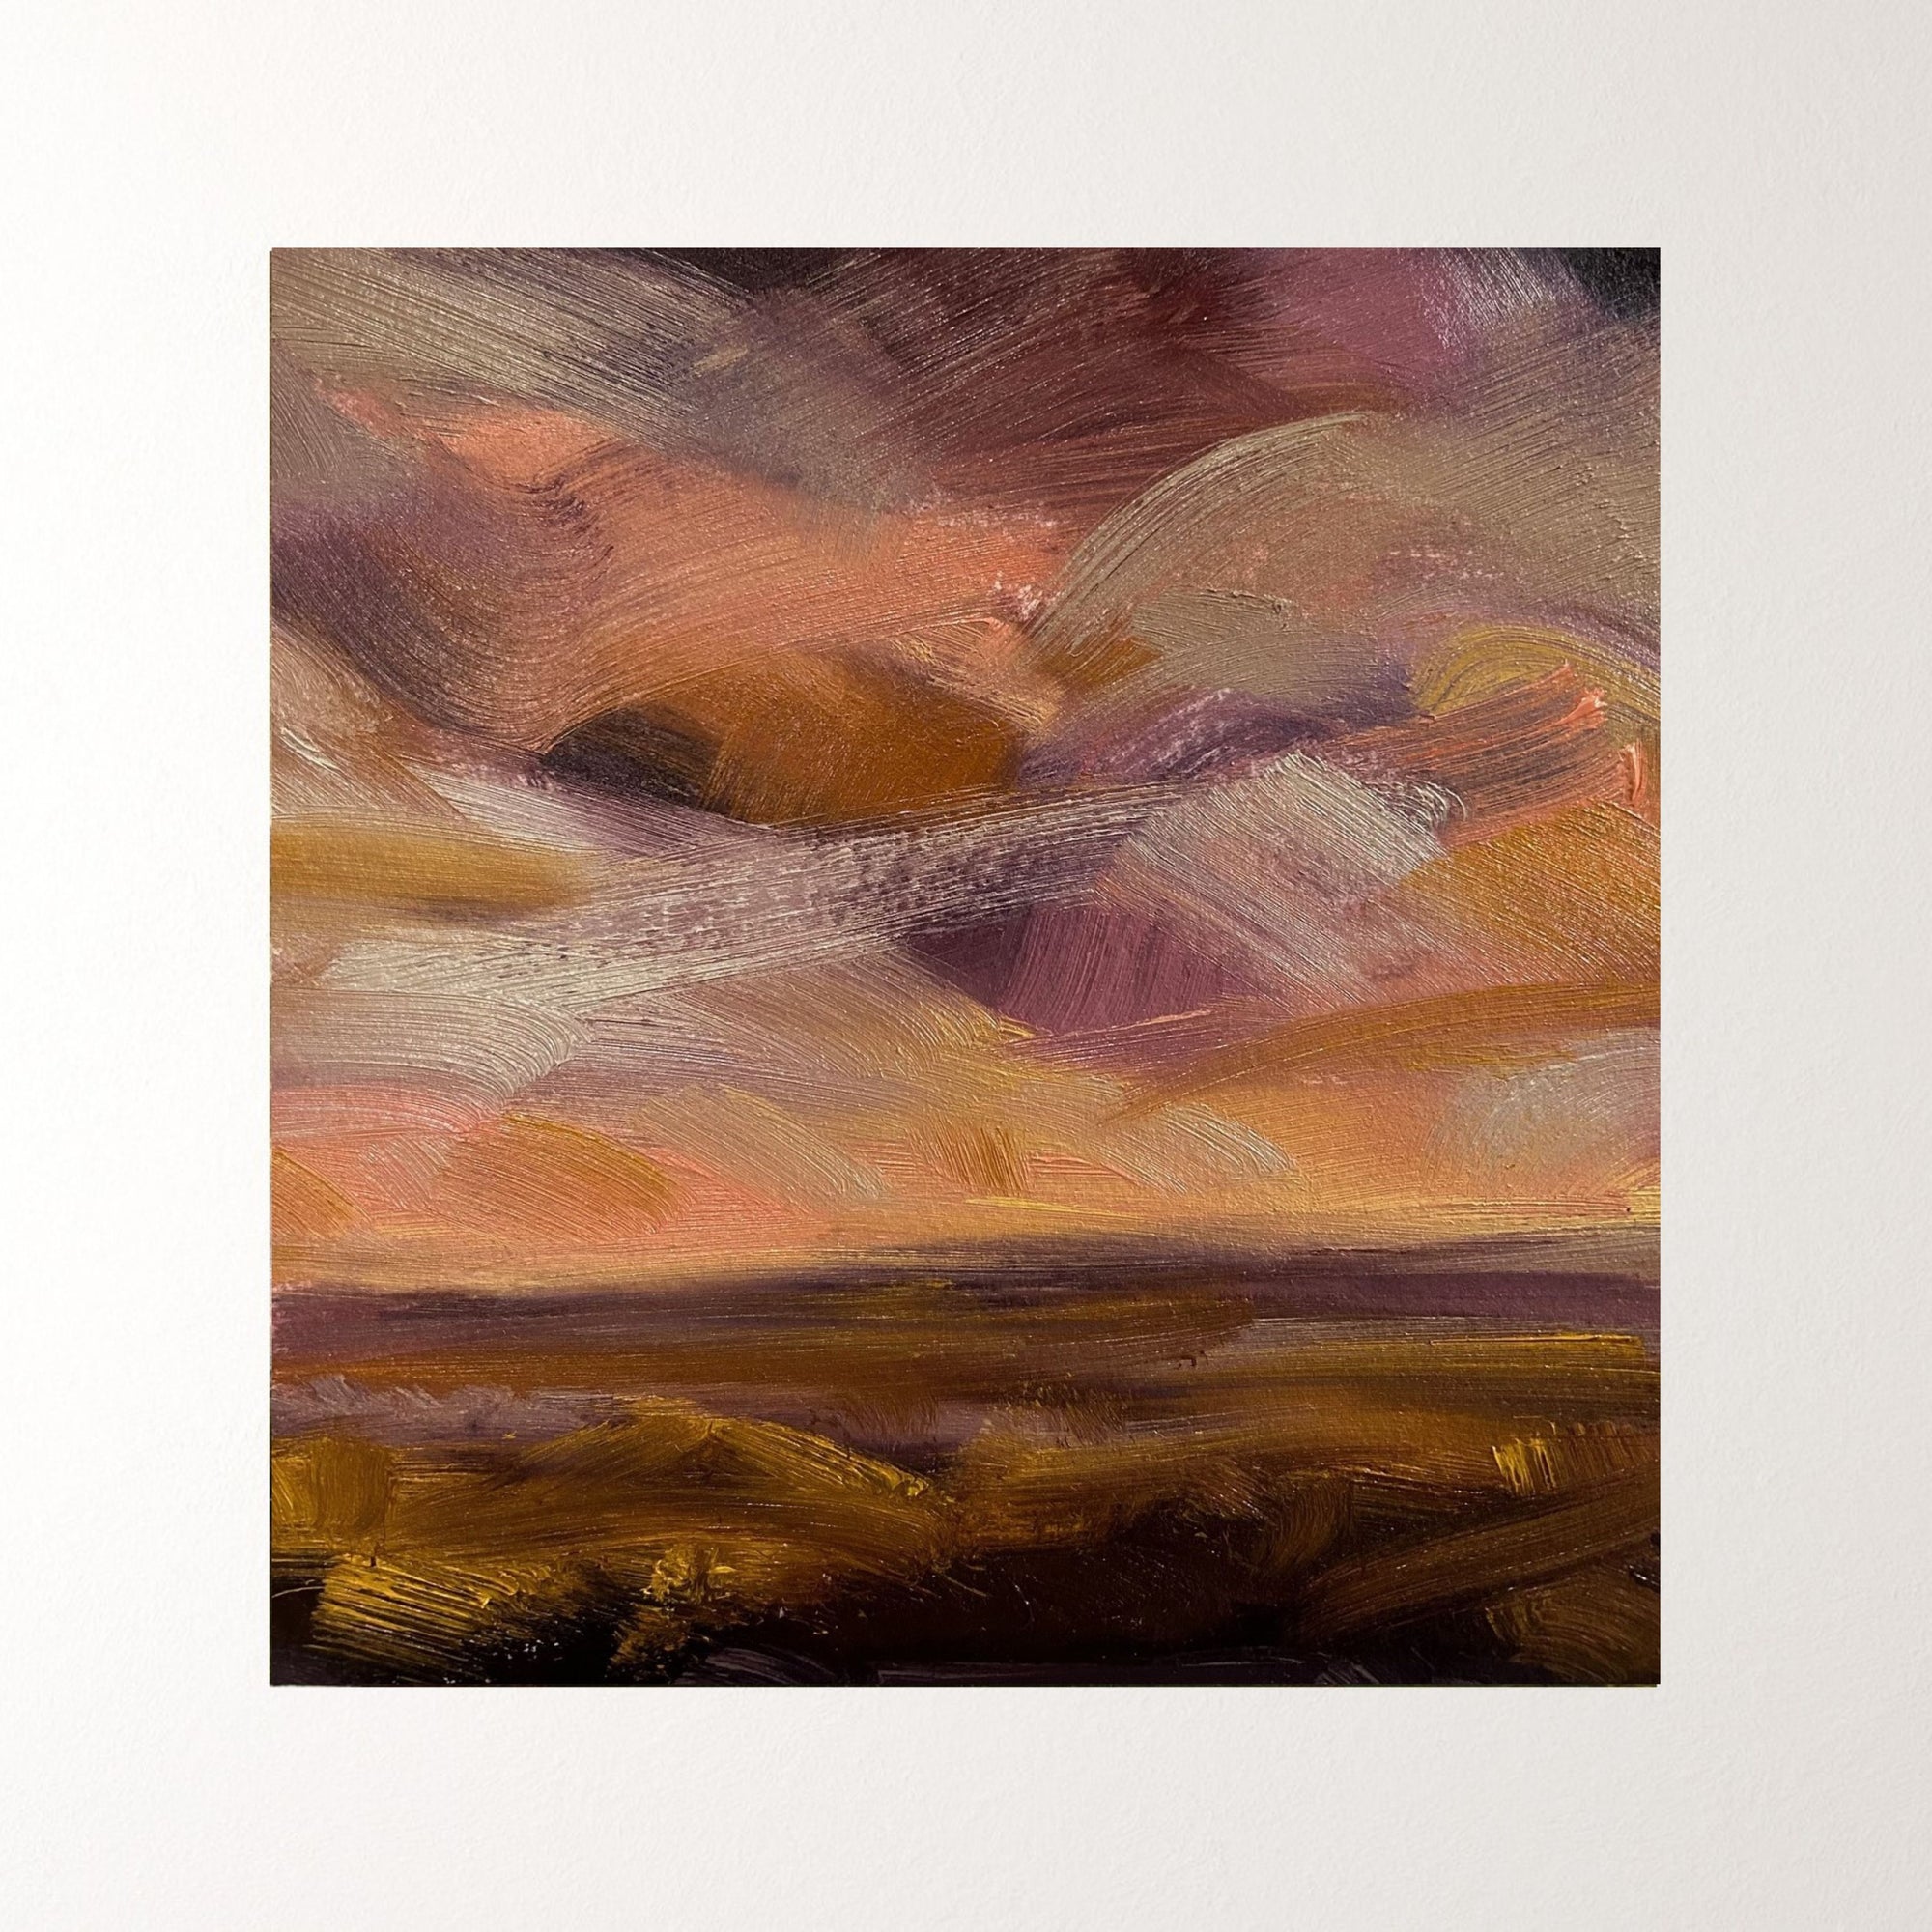 Peach Sky Original Oil On Paper Landscape Painting In Mount